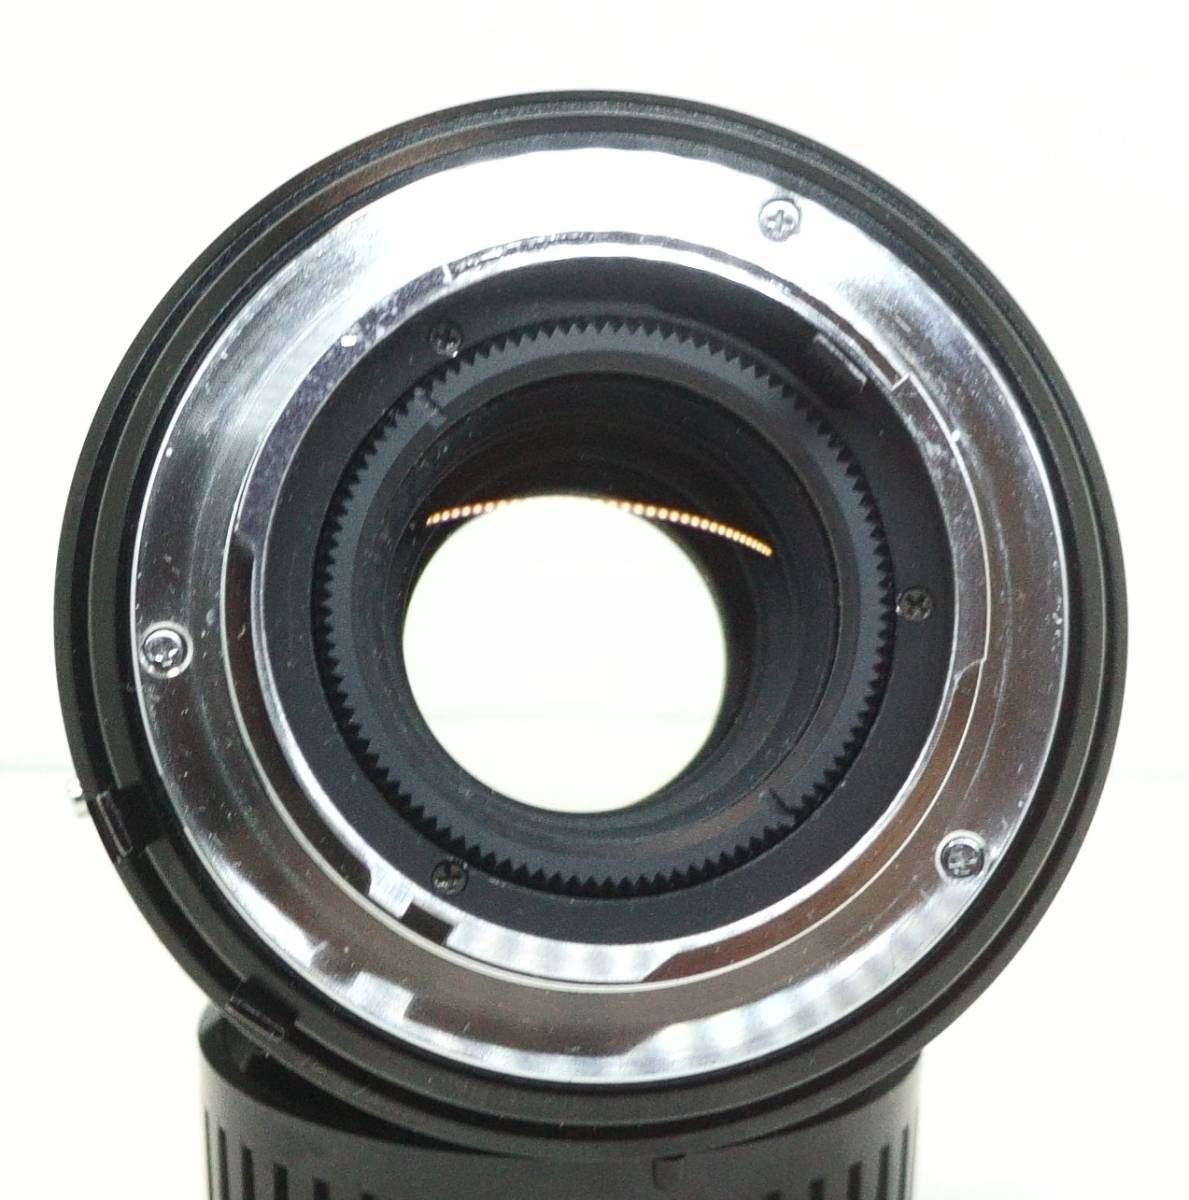 * optics excellent * popular telephoto lens (2 times seeing at distance )* Minolta MD mount for SIGMA TELE-MACRO 2X-1:1 FOR MINOLTA (H0368)